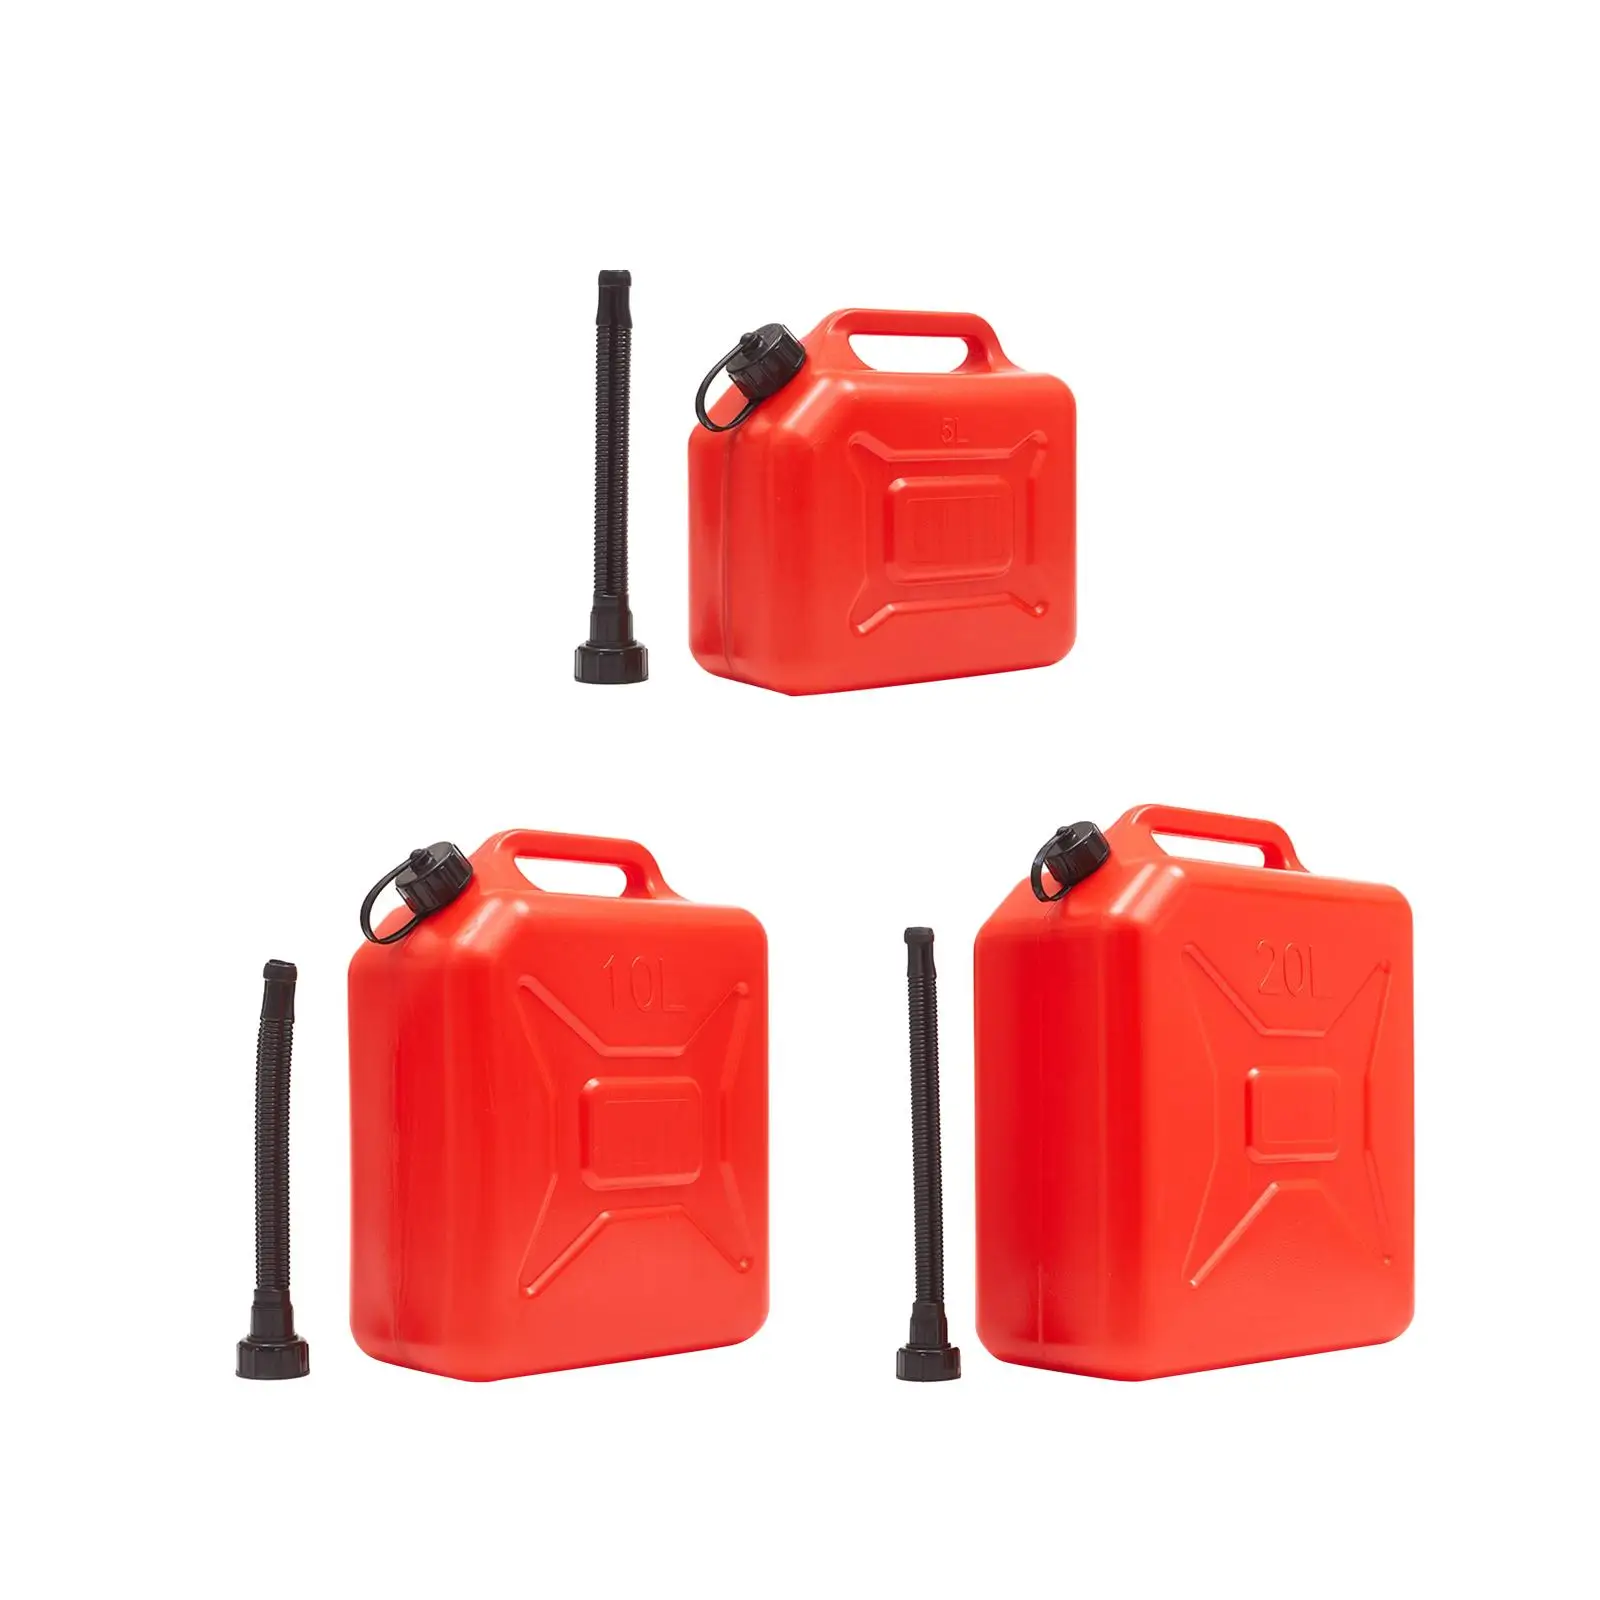 Gas Fuel Container Lightweight Water Jug Oil Cans Bucket Oil Barrel Storage Cans Petrol Tanks for Camping Emergency Backup